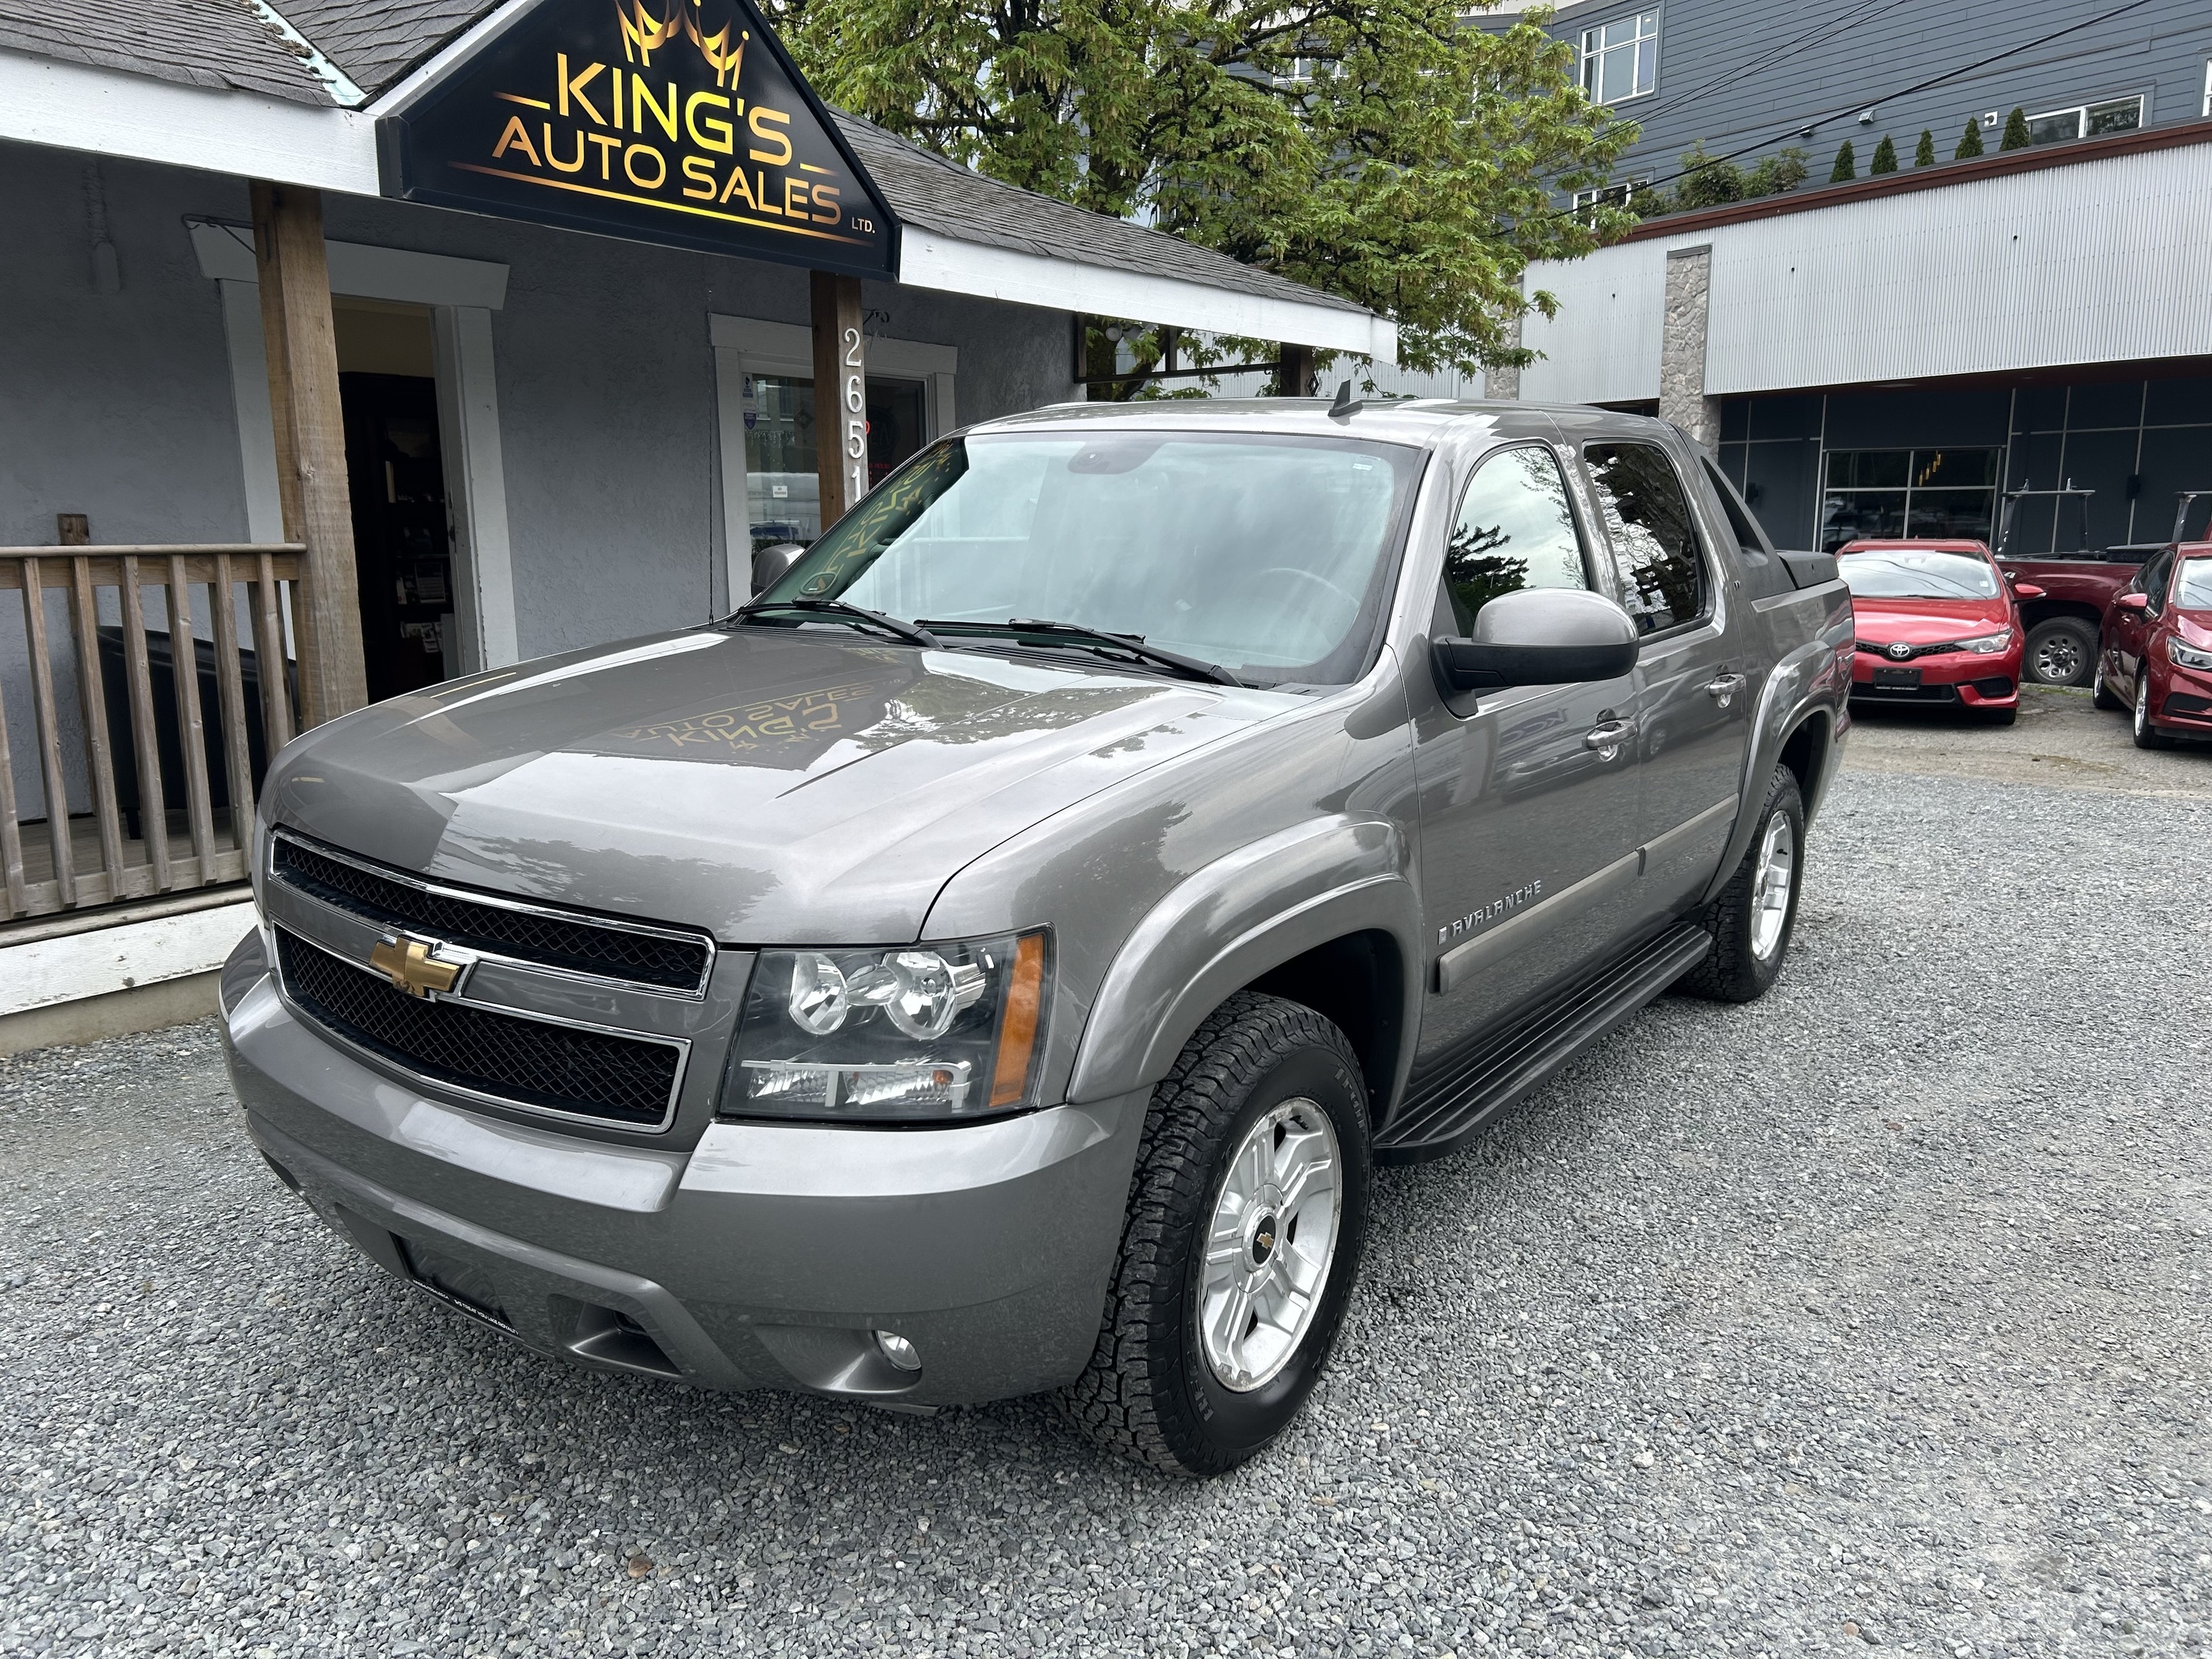 2007 Chevrolet Avalanche 4WD Crew Cab LTZ 5.3L V8 Leather & Roof